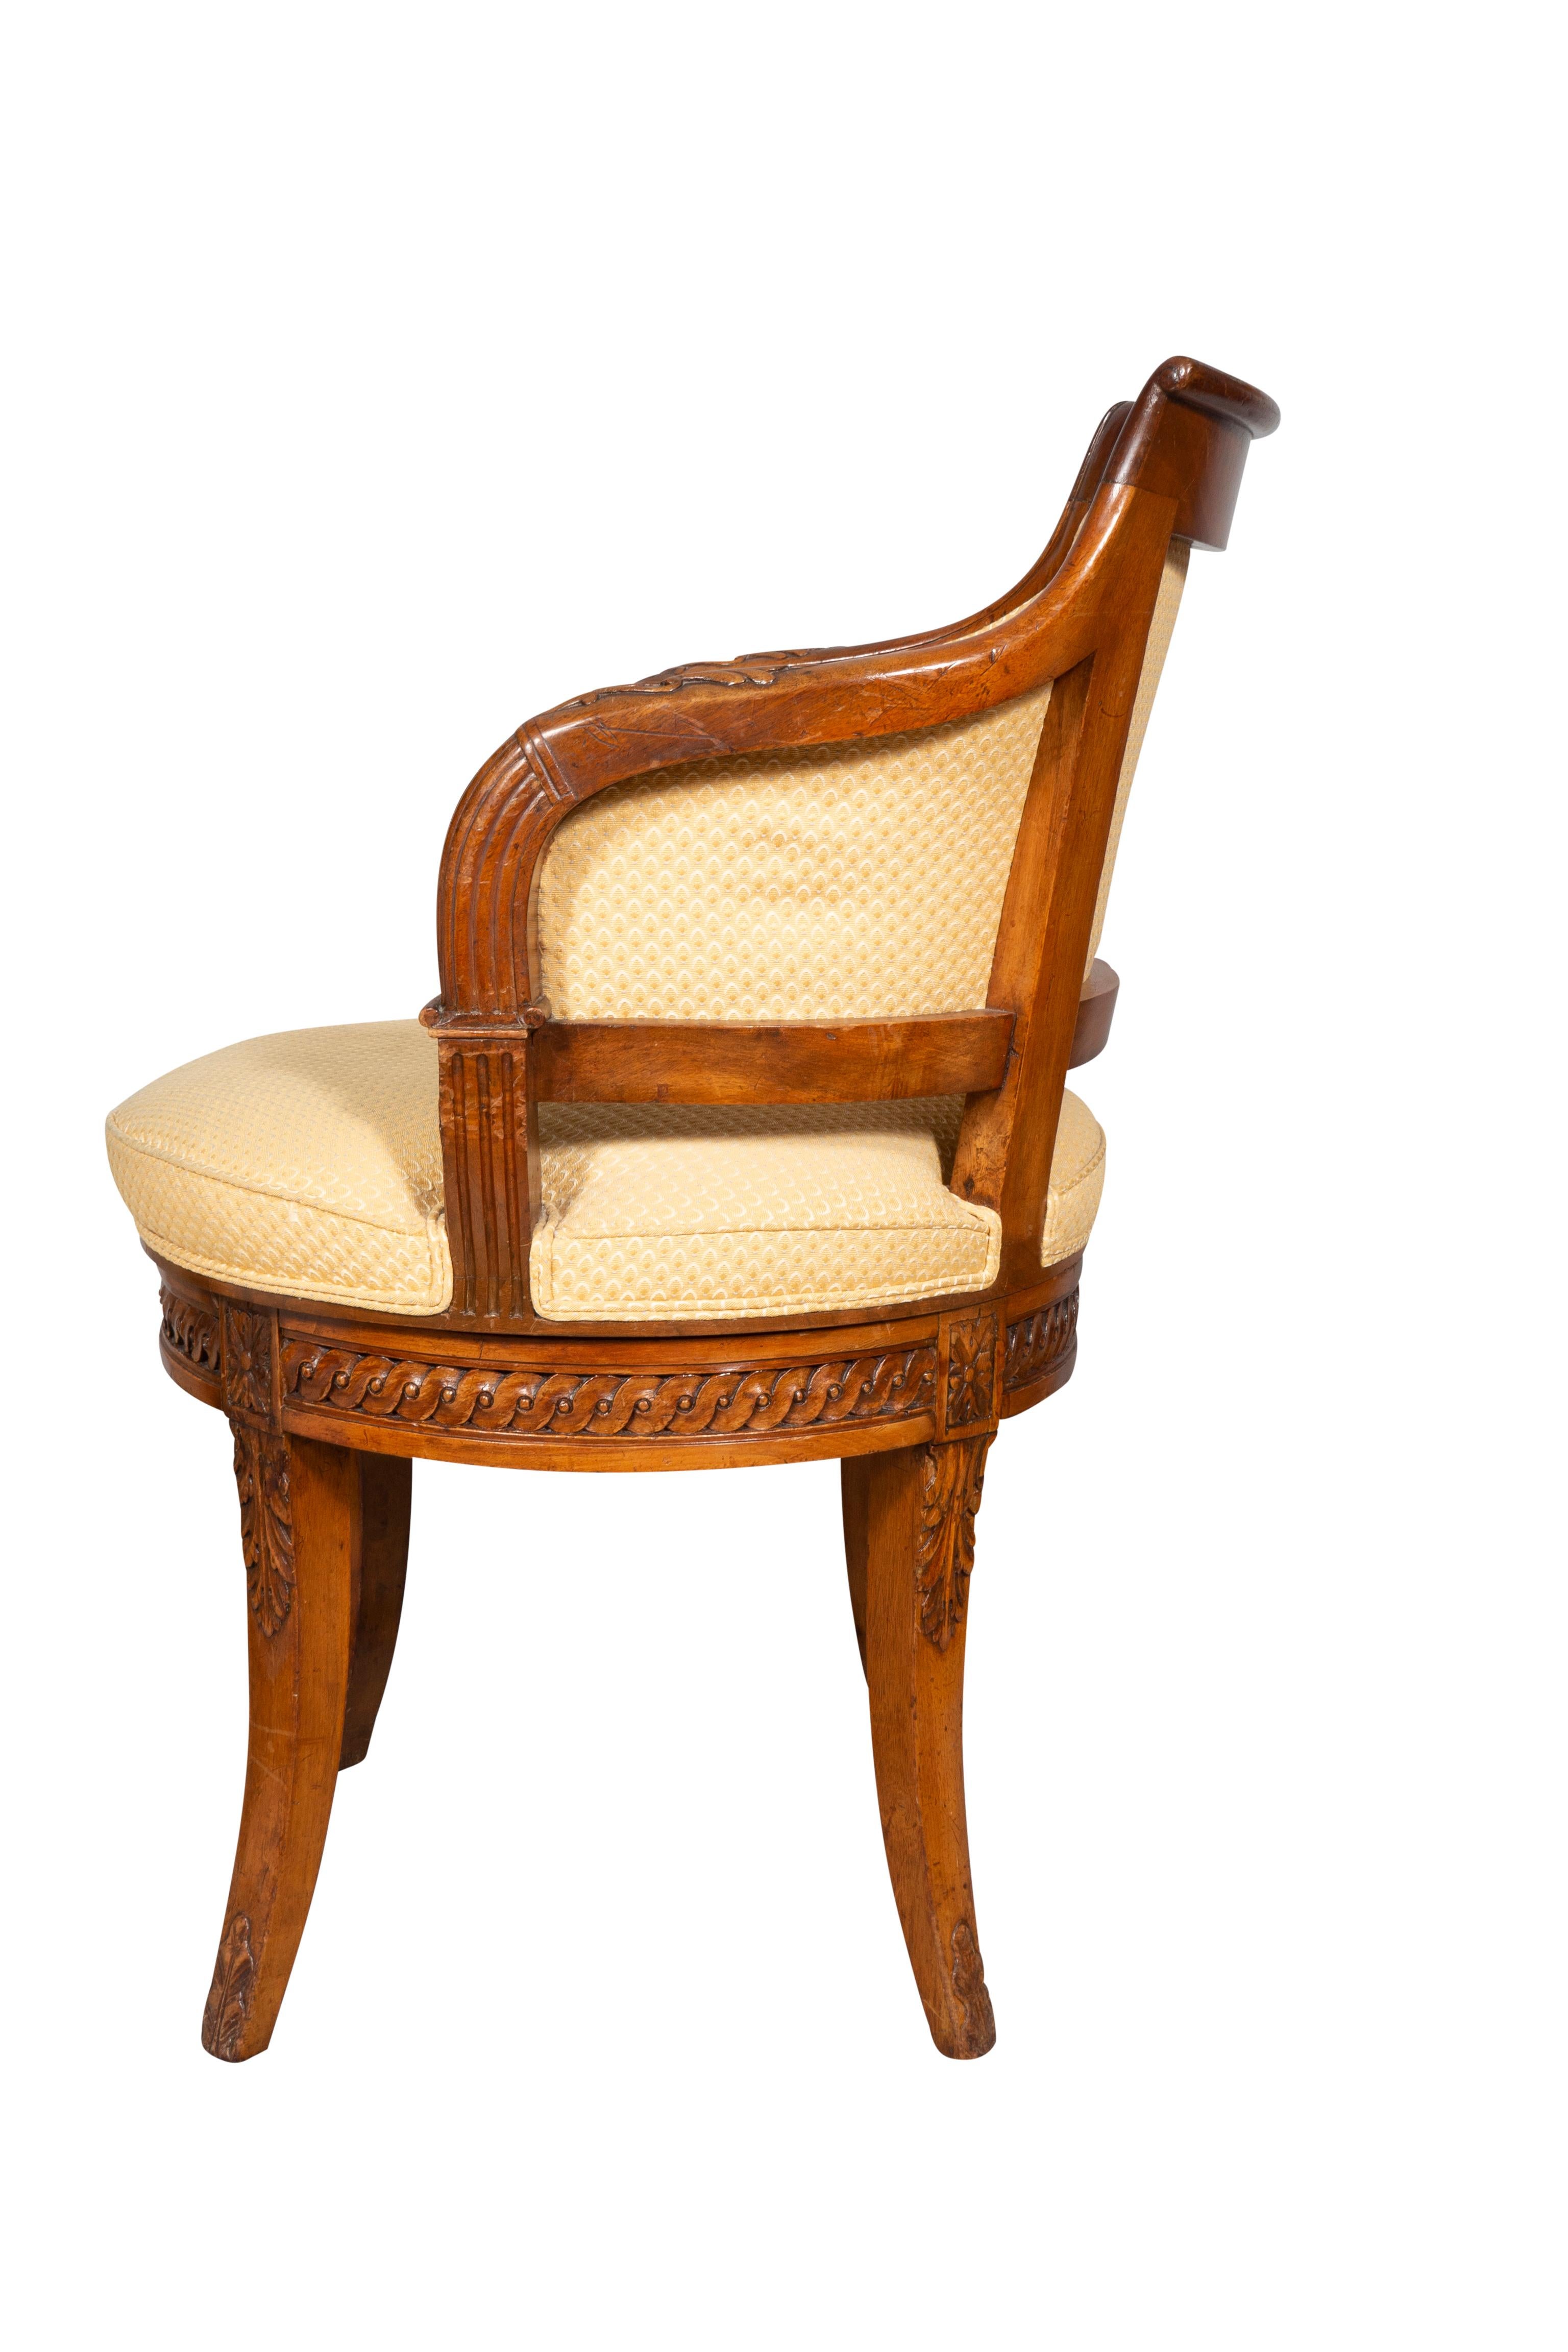 Directoire Walnut Desk Chair In Good Condition For Sale In Essex, MA